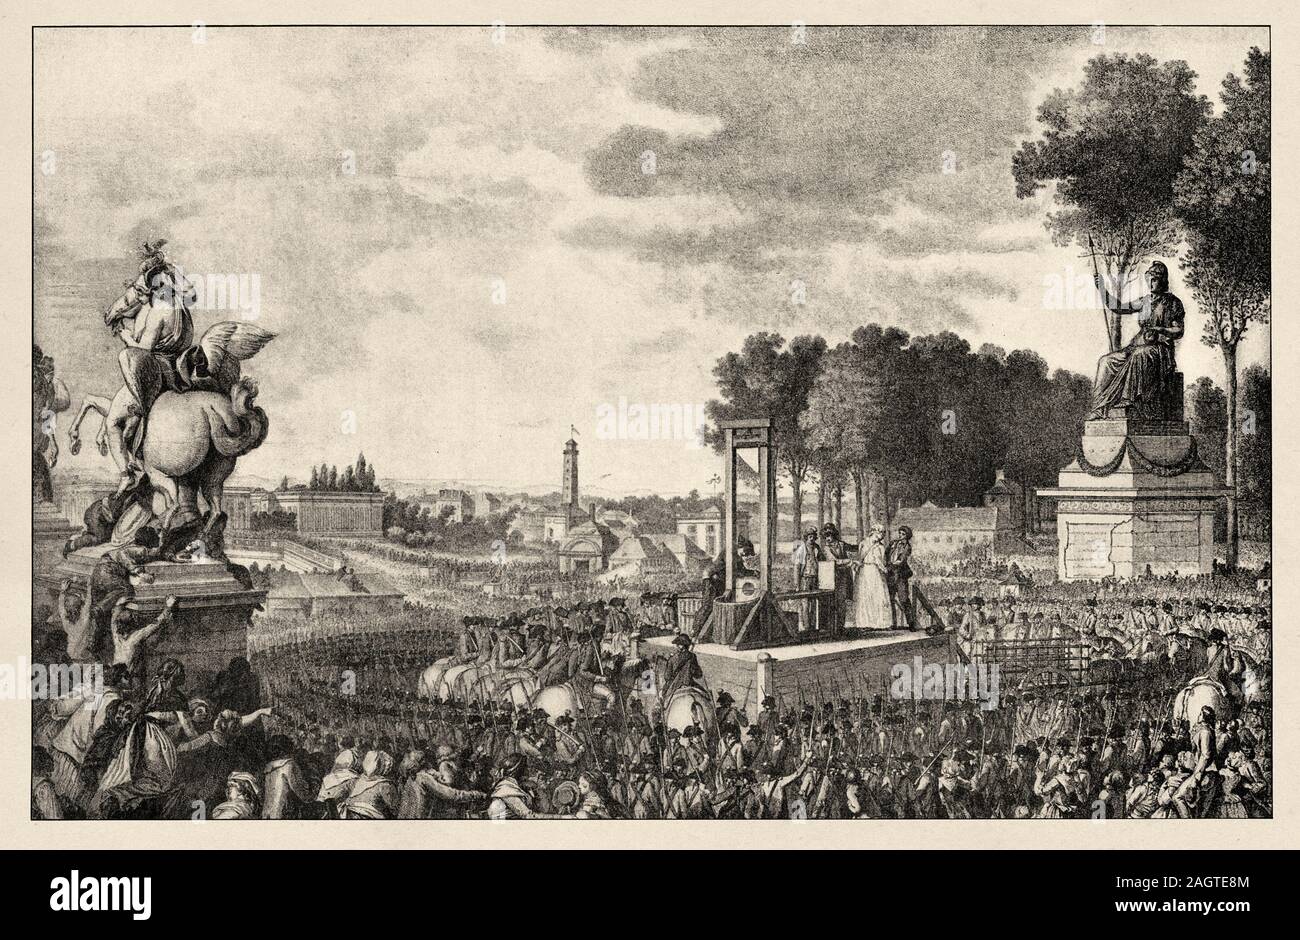 Execution in the guillotine of Marie-Antoinette D'Autriche octobre 16, 1793. French Revolution 18th century. History of France, old engraved illustrat Stock Photo